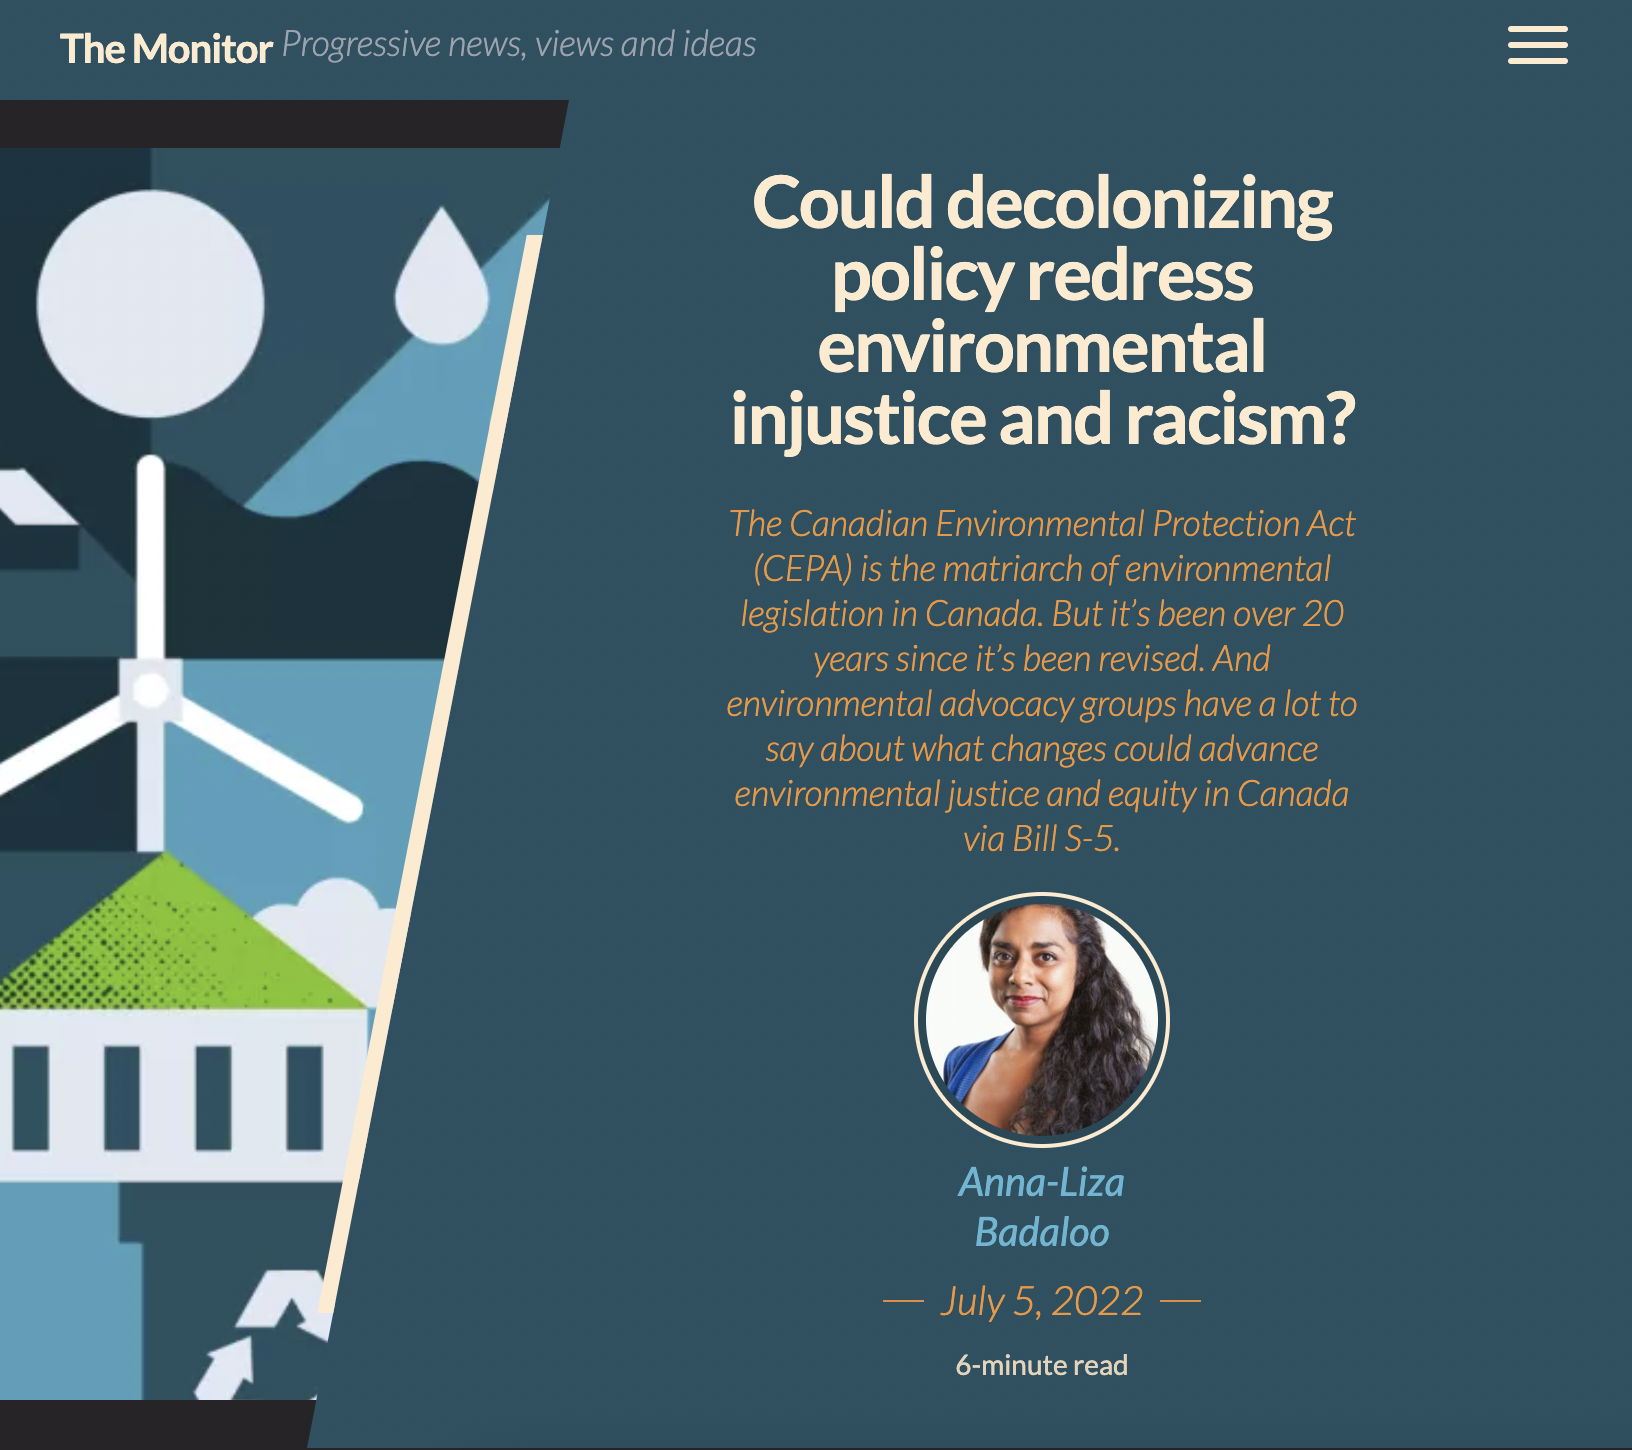 Photo of article written by Anna-Liza titled "Could decolonizing policy redress environmental injustice and racism?"